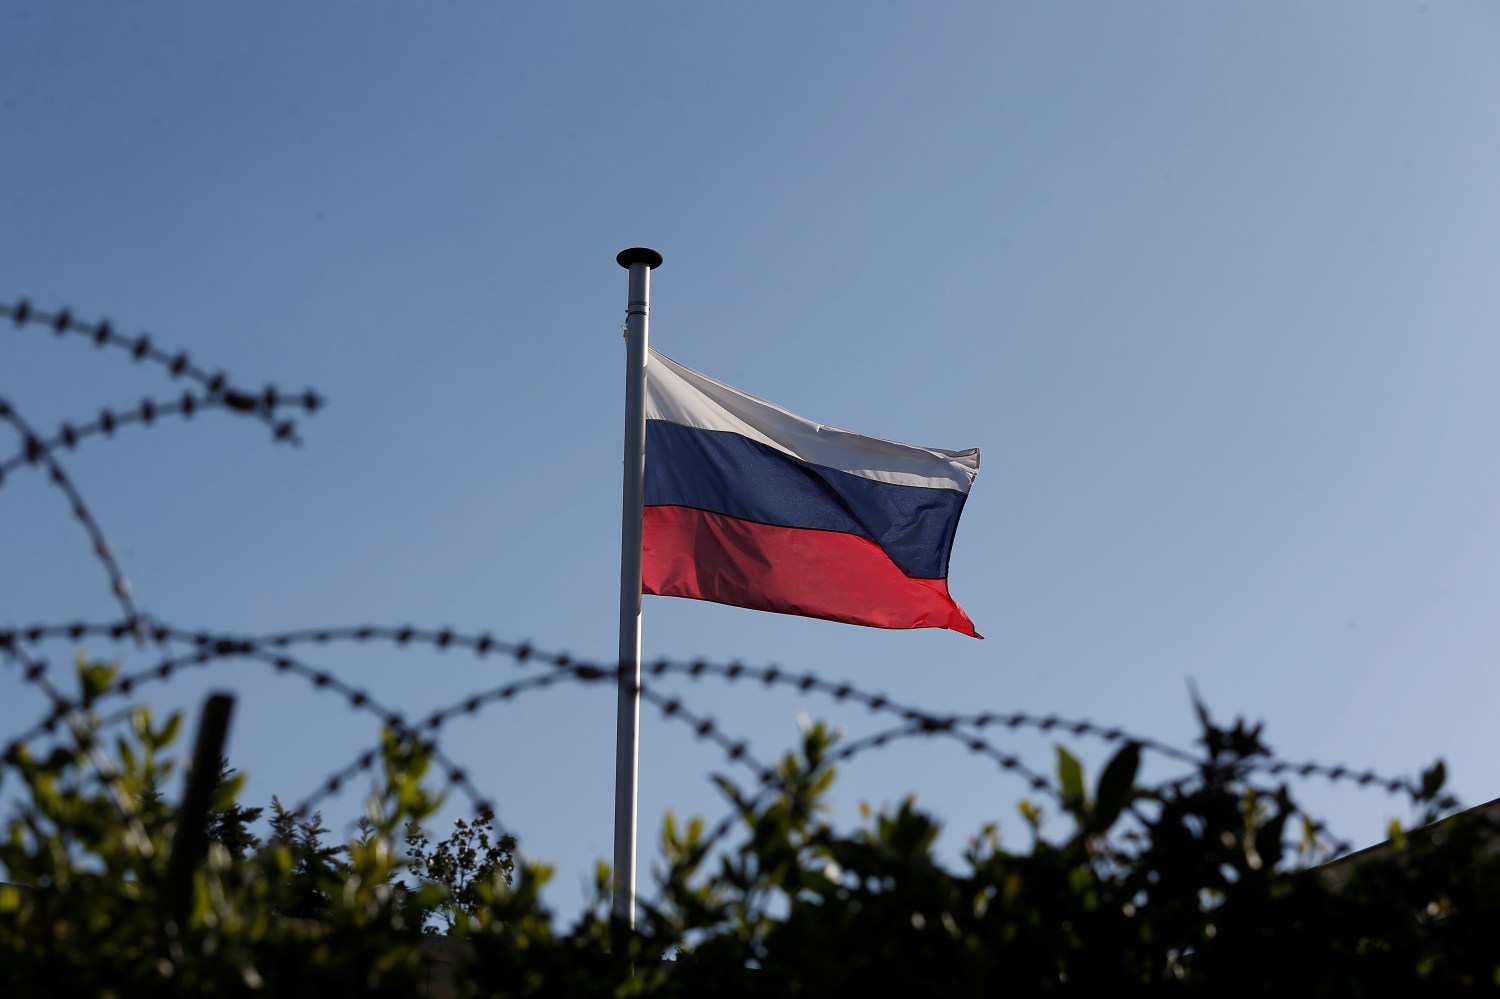 A Russian flag flutters atop the Russian consulate after an explosion, in Athens, Greece March 22, 2019. REUTERS/Costas Baltas - RC188C90E370